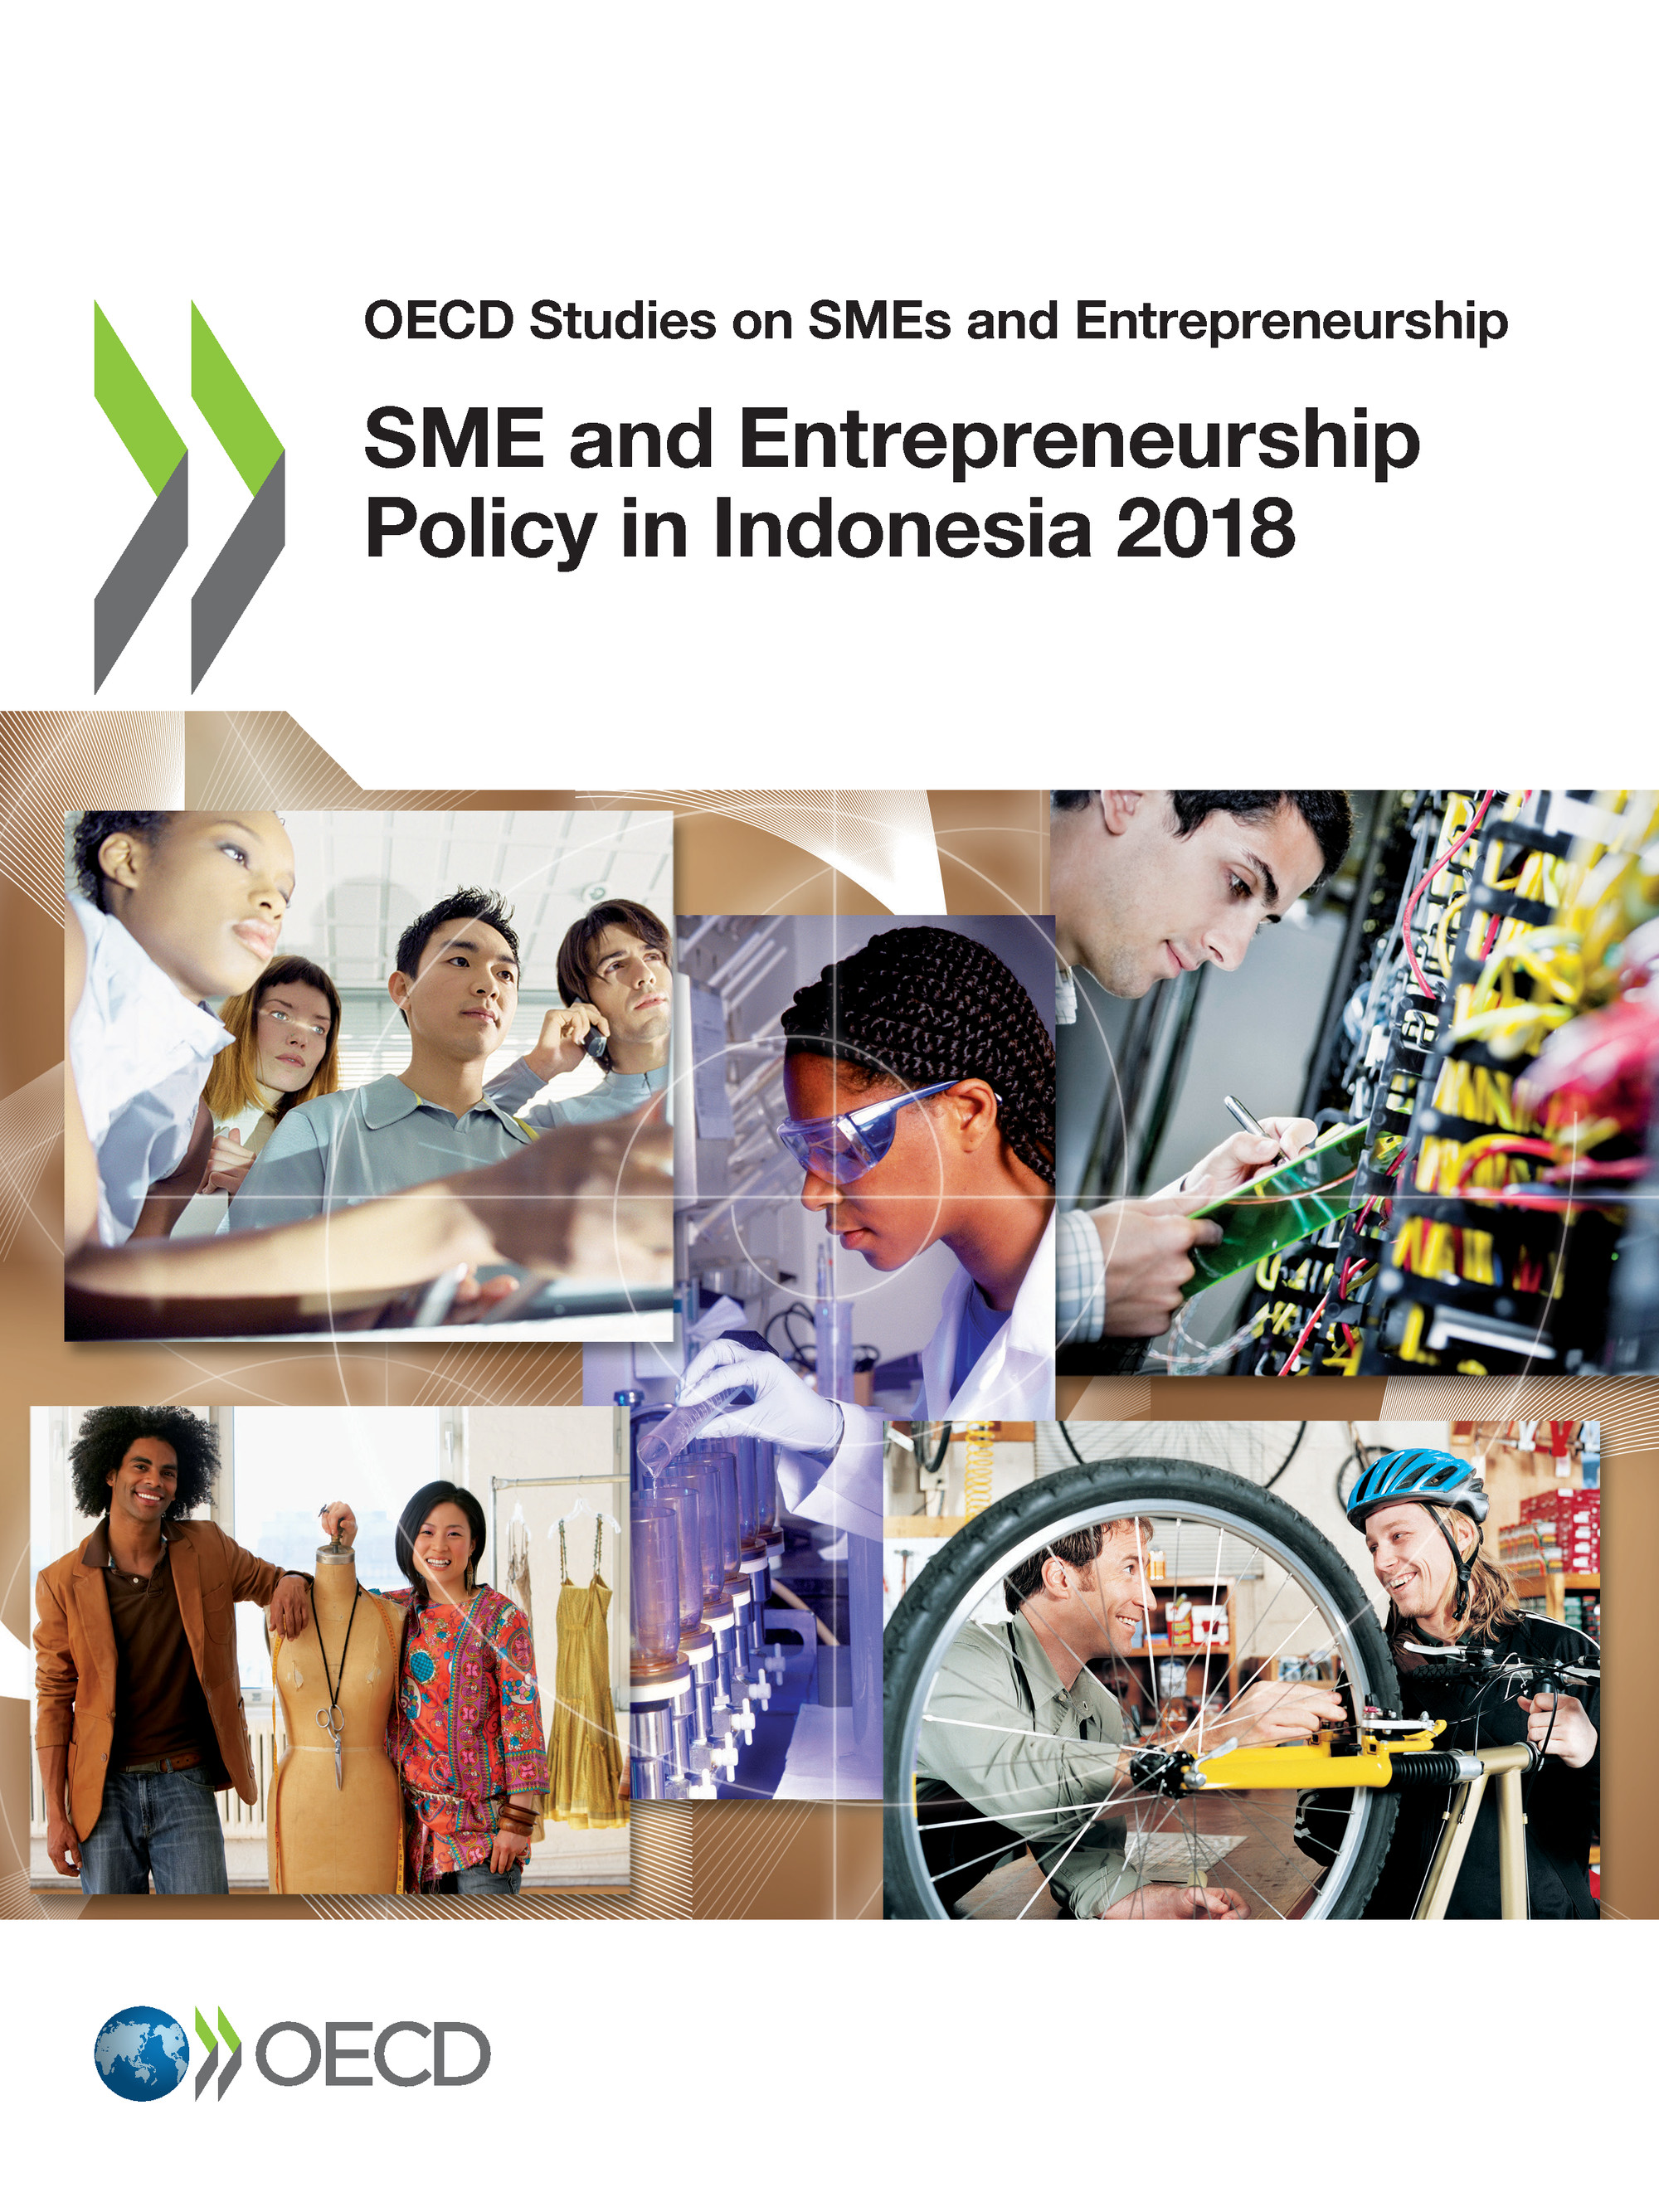 SME and Entrepreneurship Policy in Indonesia 2018 -  Collectif - OCDE / OECD